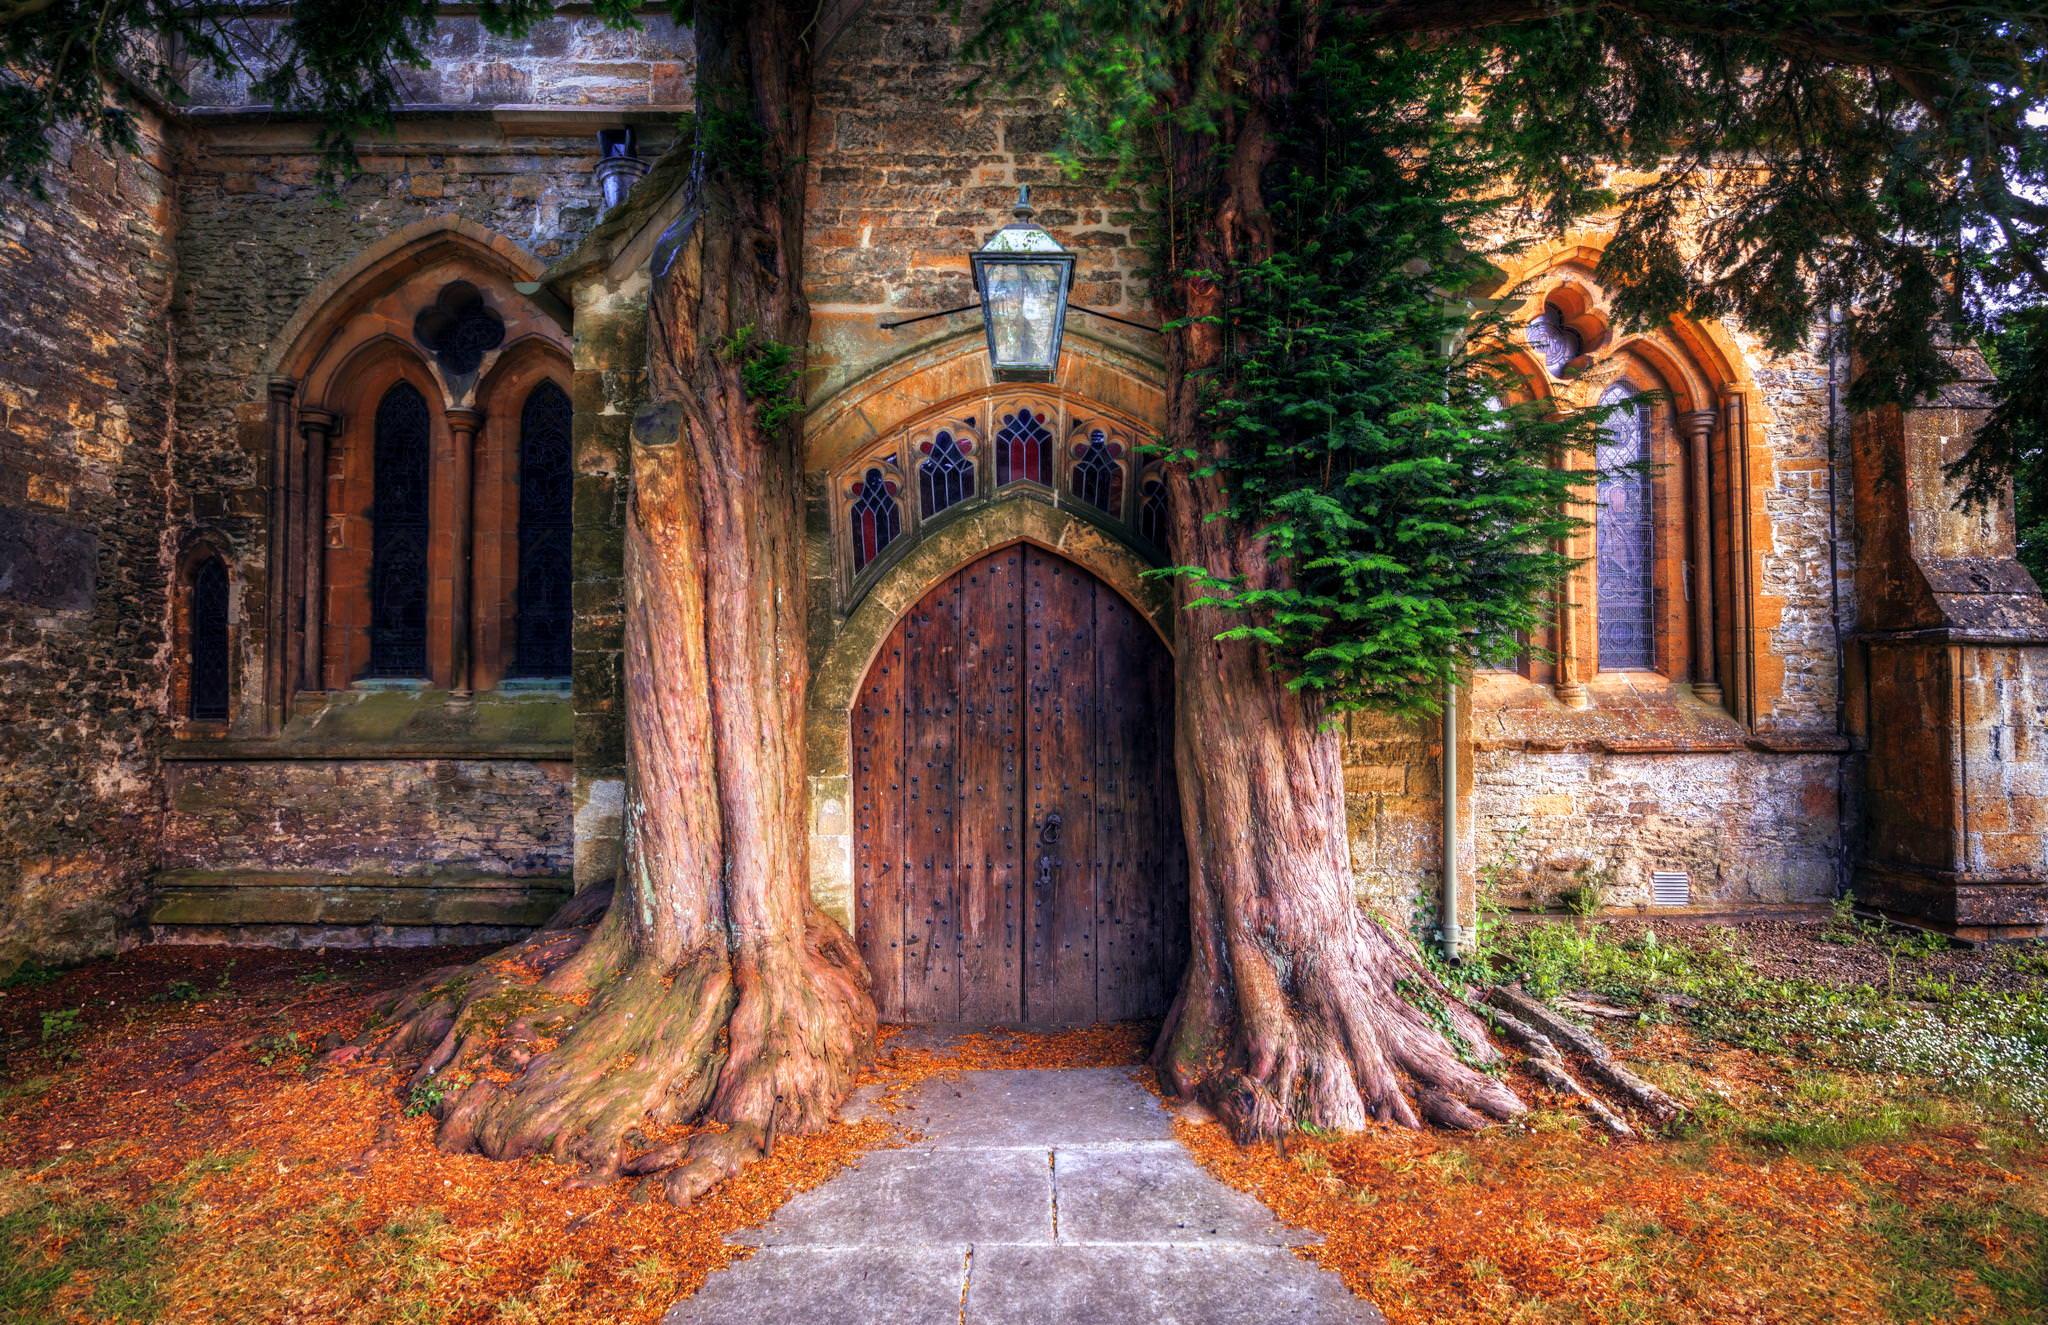 General 2048x1325 architecture Costwolds village England UK trees church door old building HDR arch window